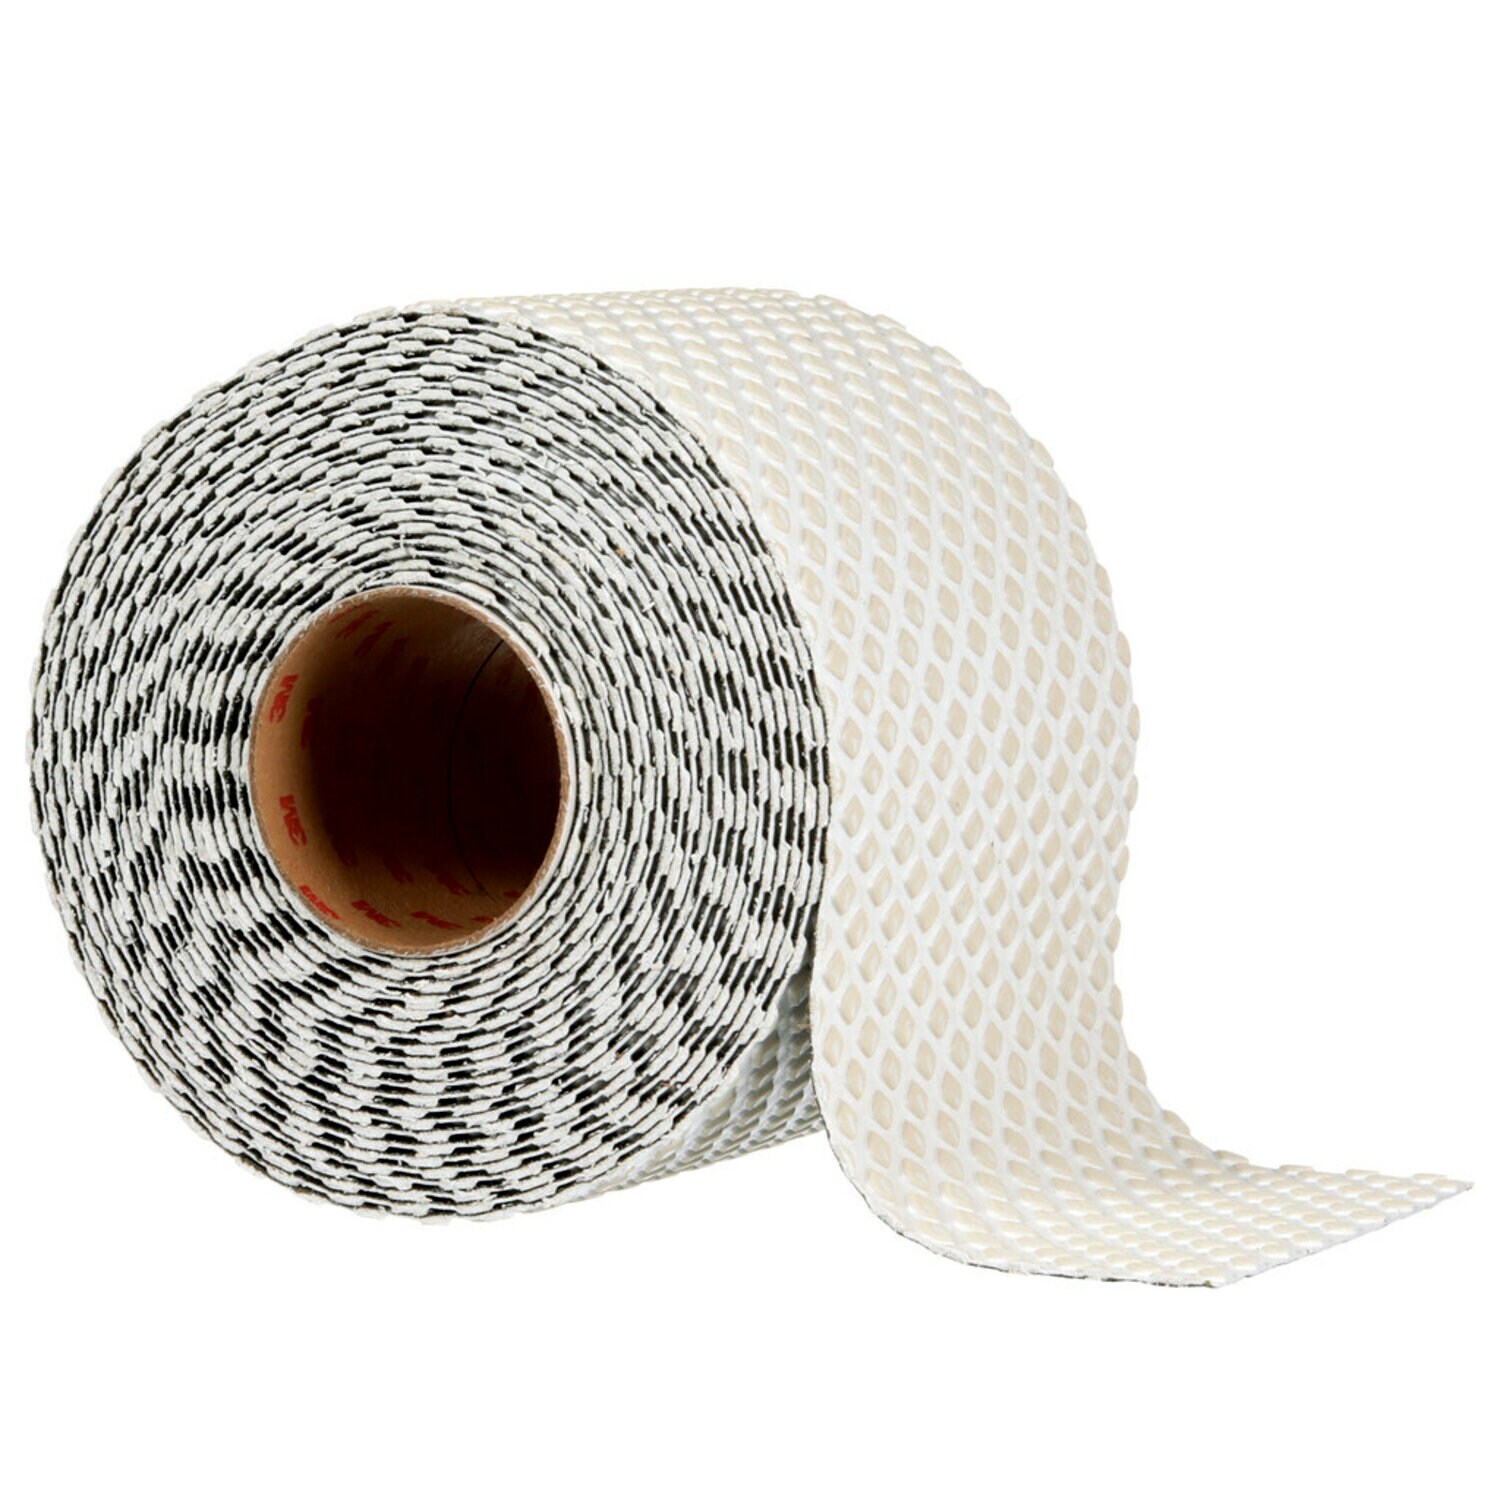 7100007479 - 3M Stamark High Performance Tape L380AW White, Linered, Configurable
Roll